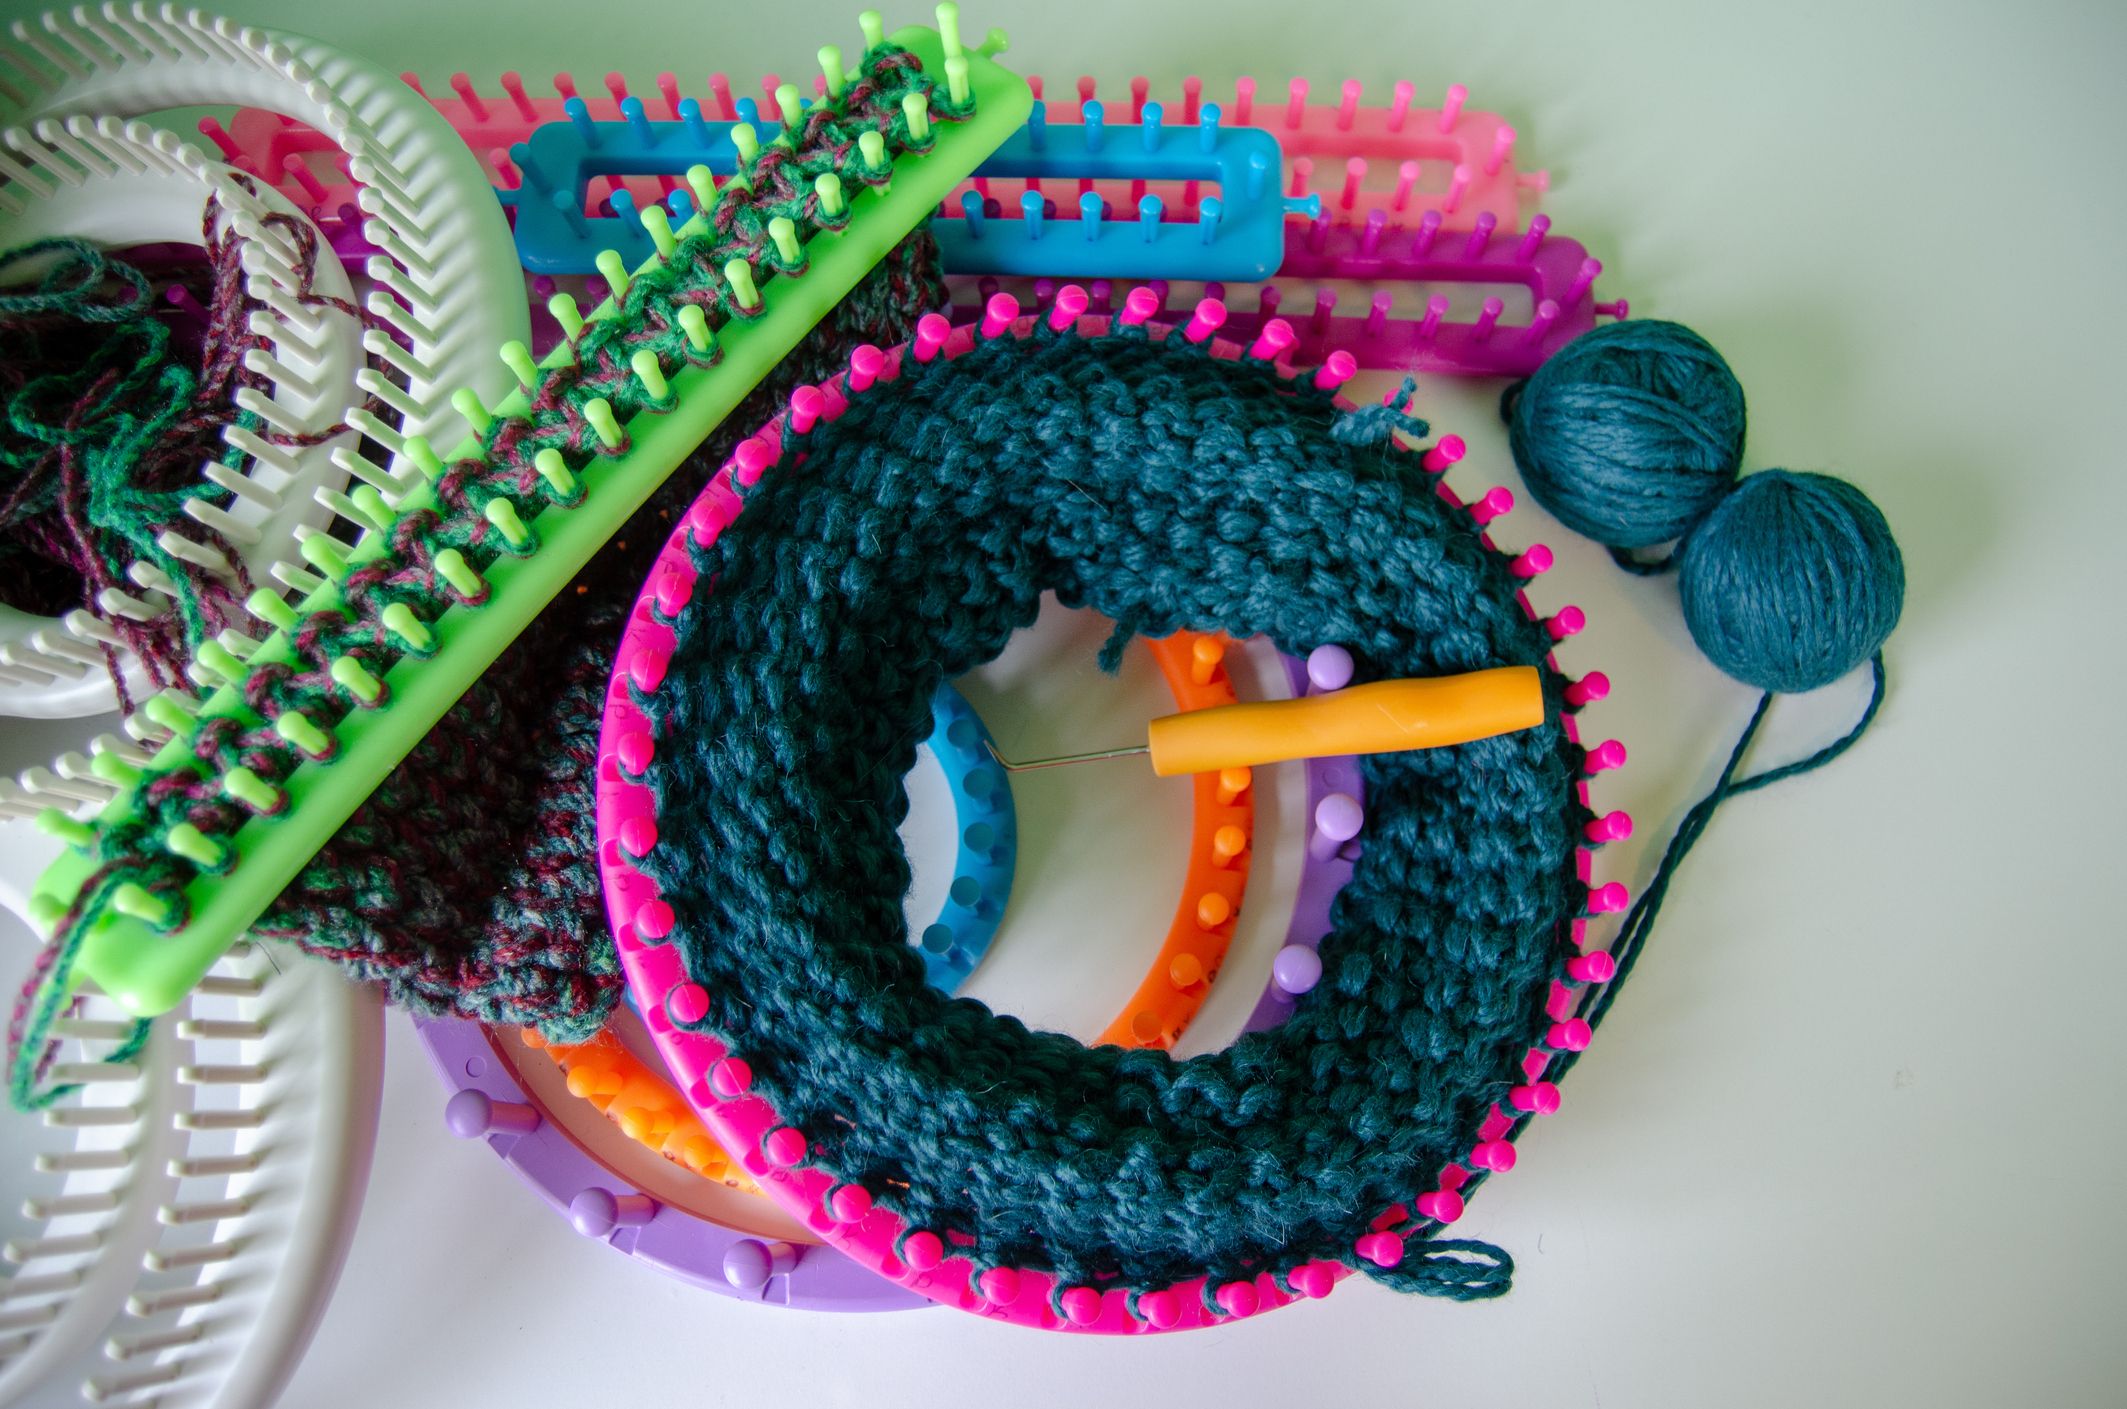 Loom knitting: How to use a knitting loom and the kit you need